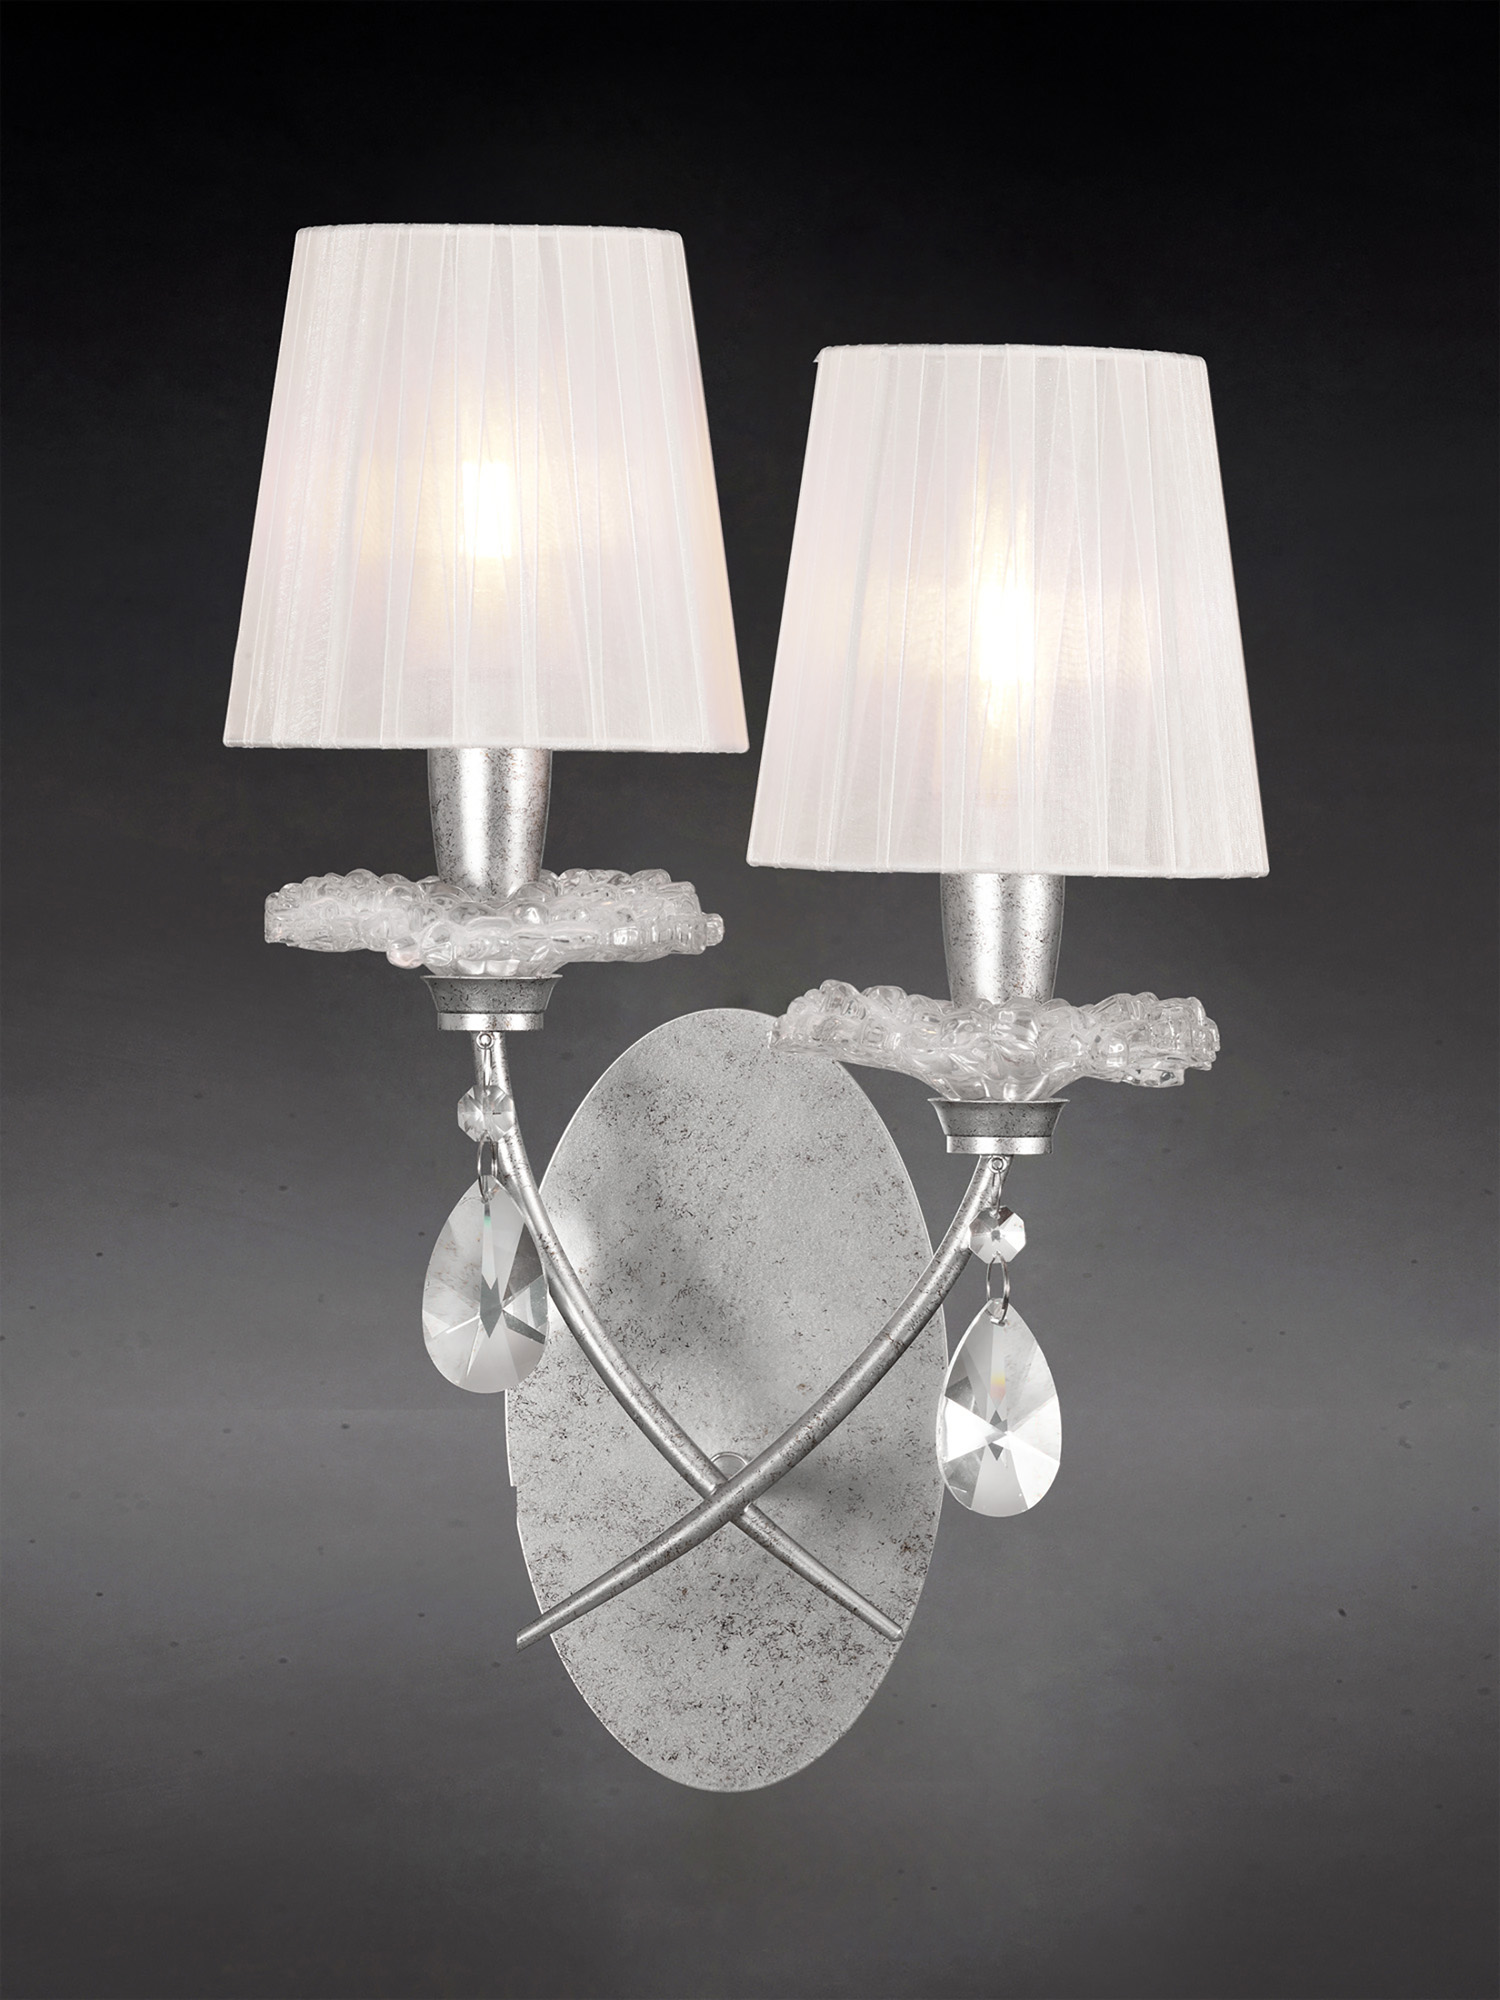 Sophie Silver Wall Lights Mantra Armed Wall Lights